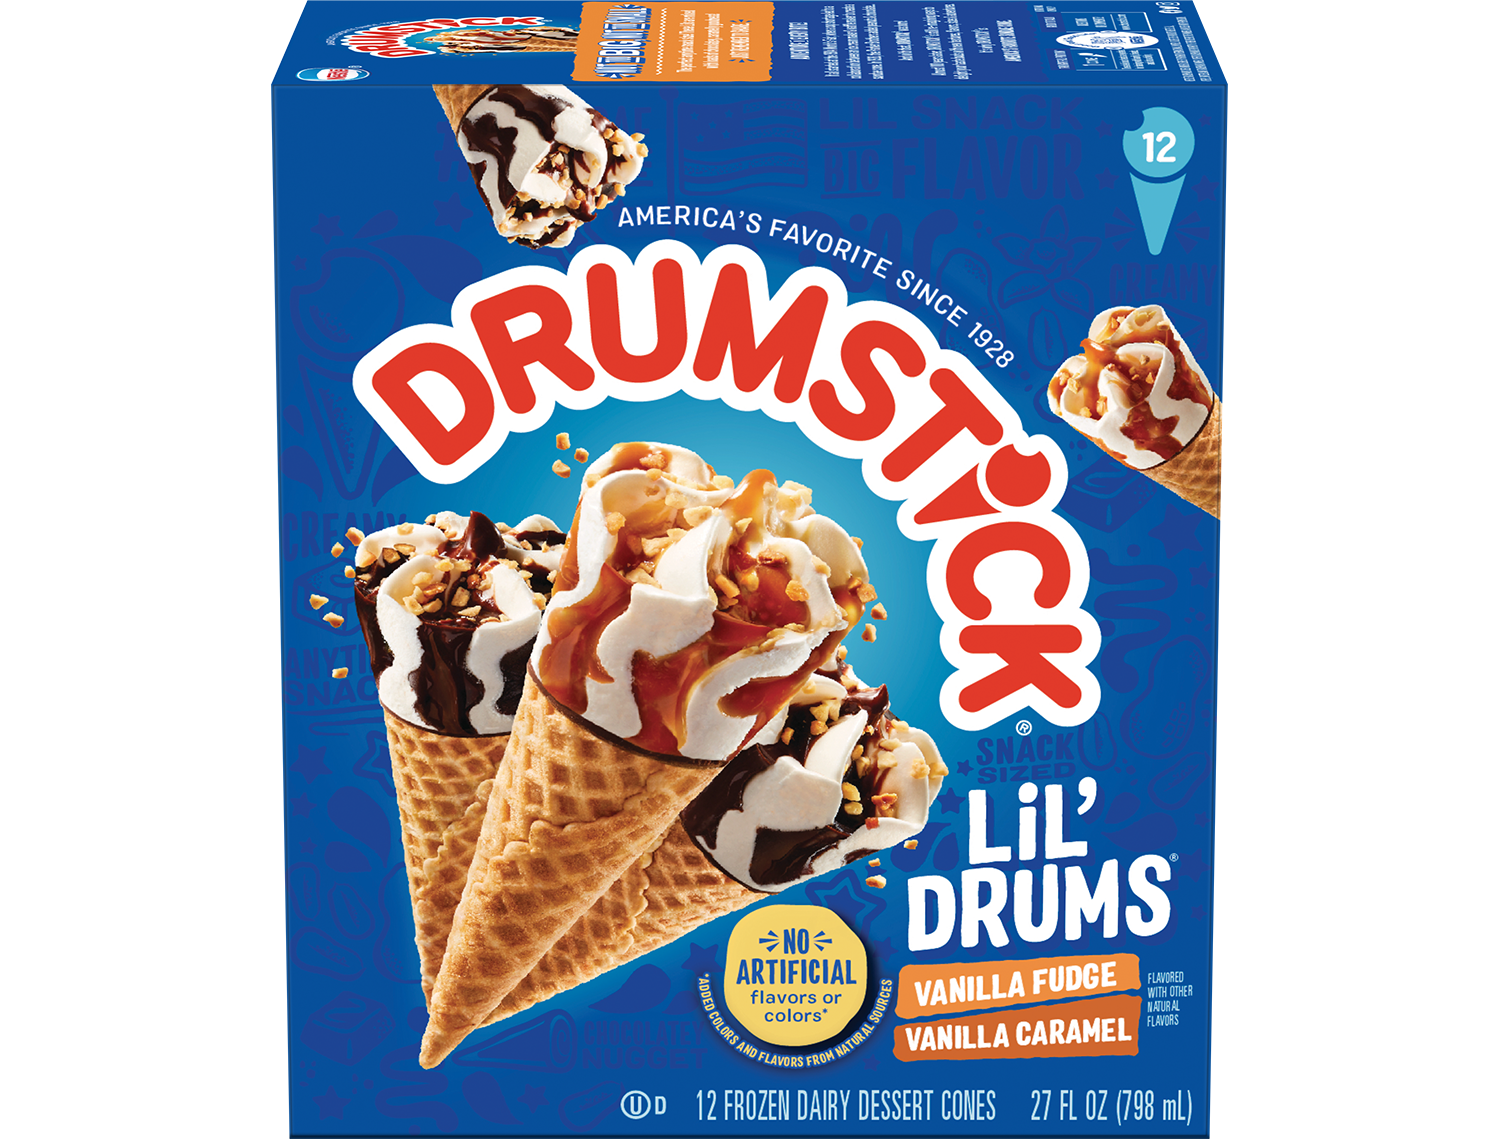 Box of 12 Drumstick lil' drums snack-size ice cream cones